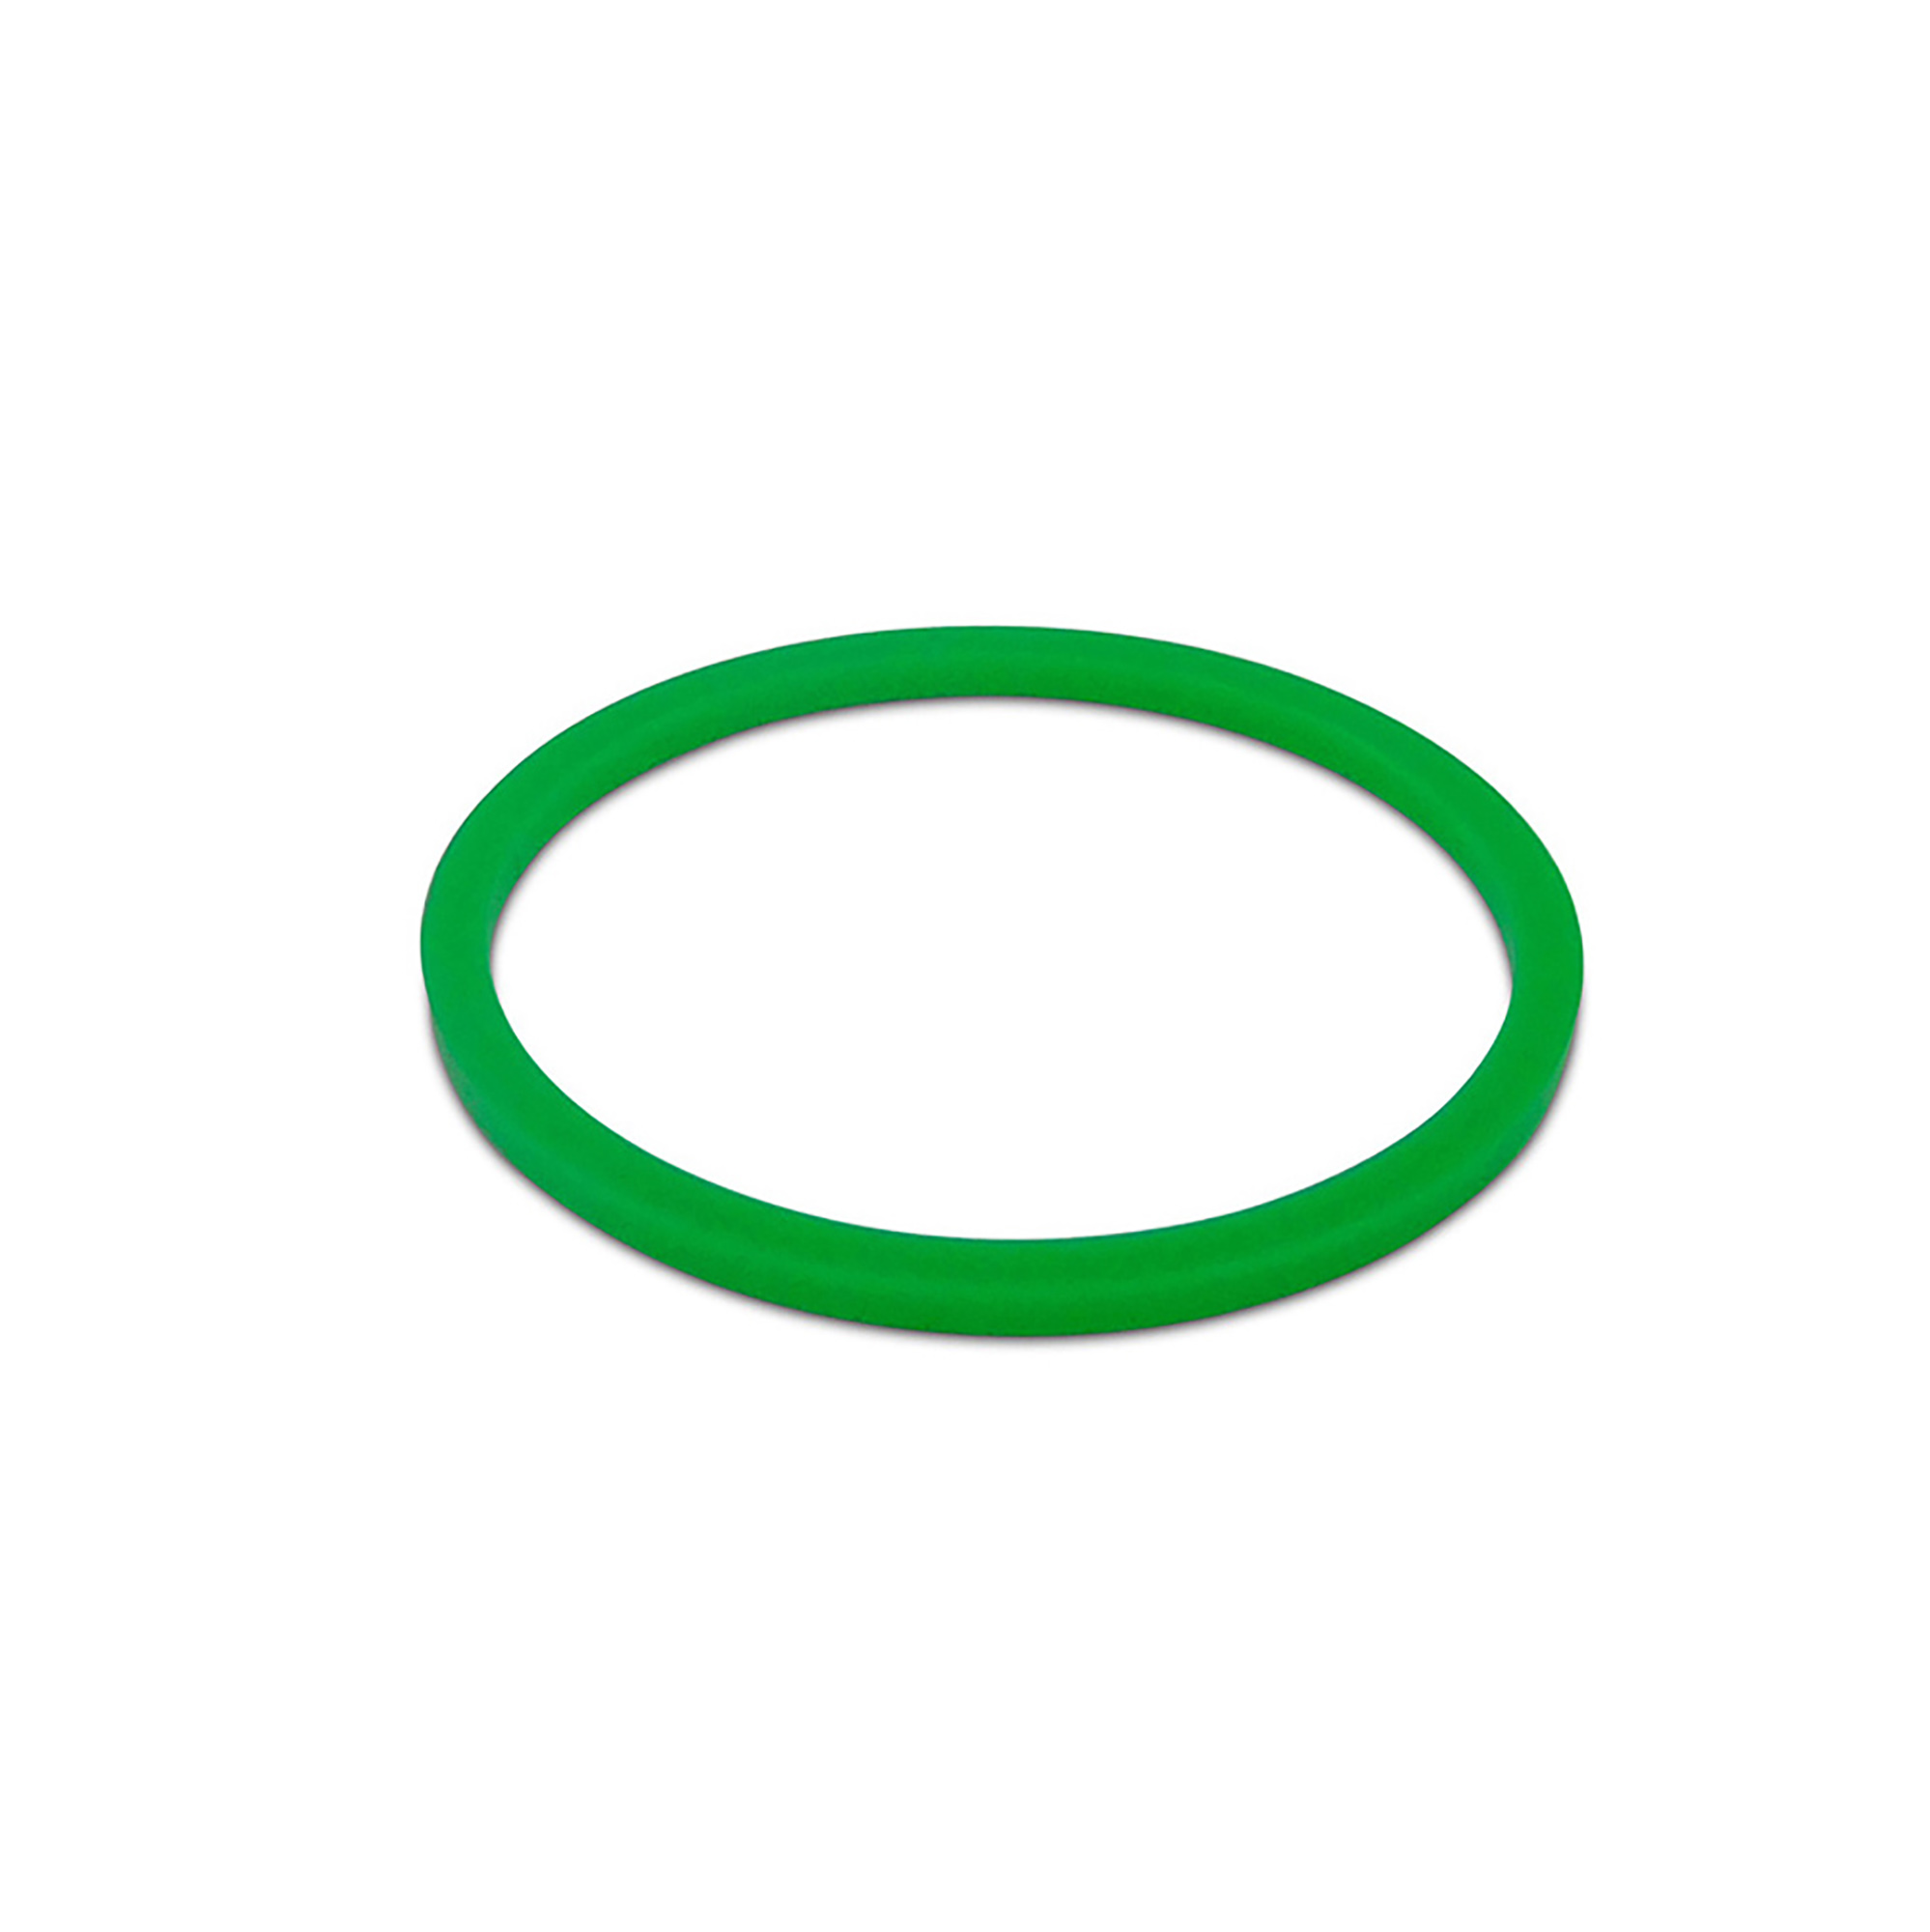 DX240003  Bolor Green Ring For use with Bolor Downlight